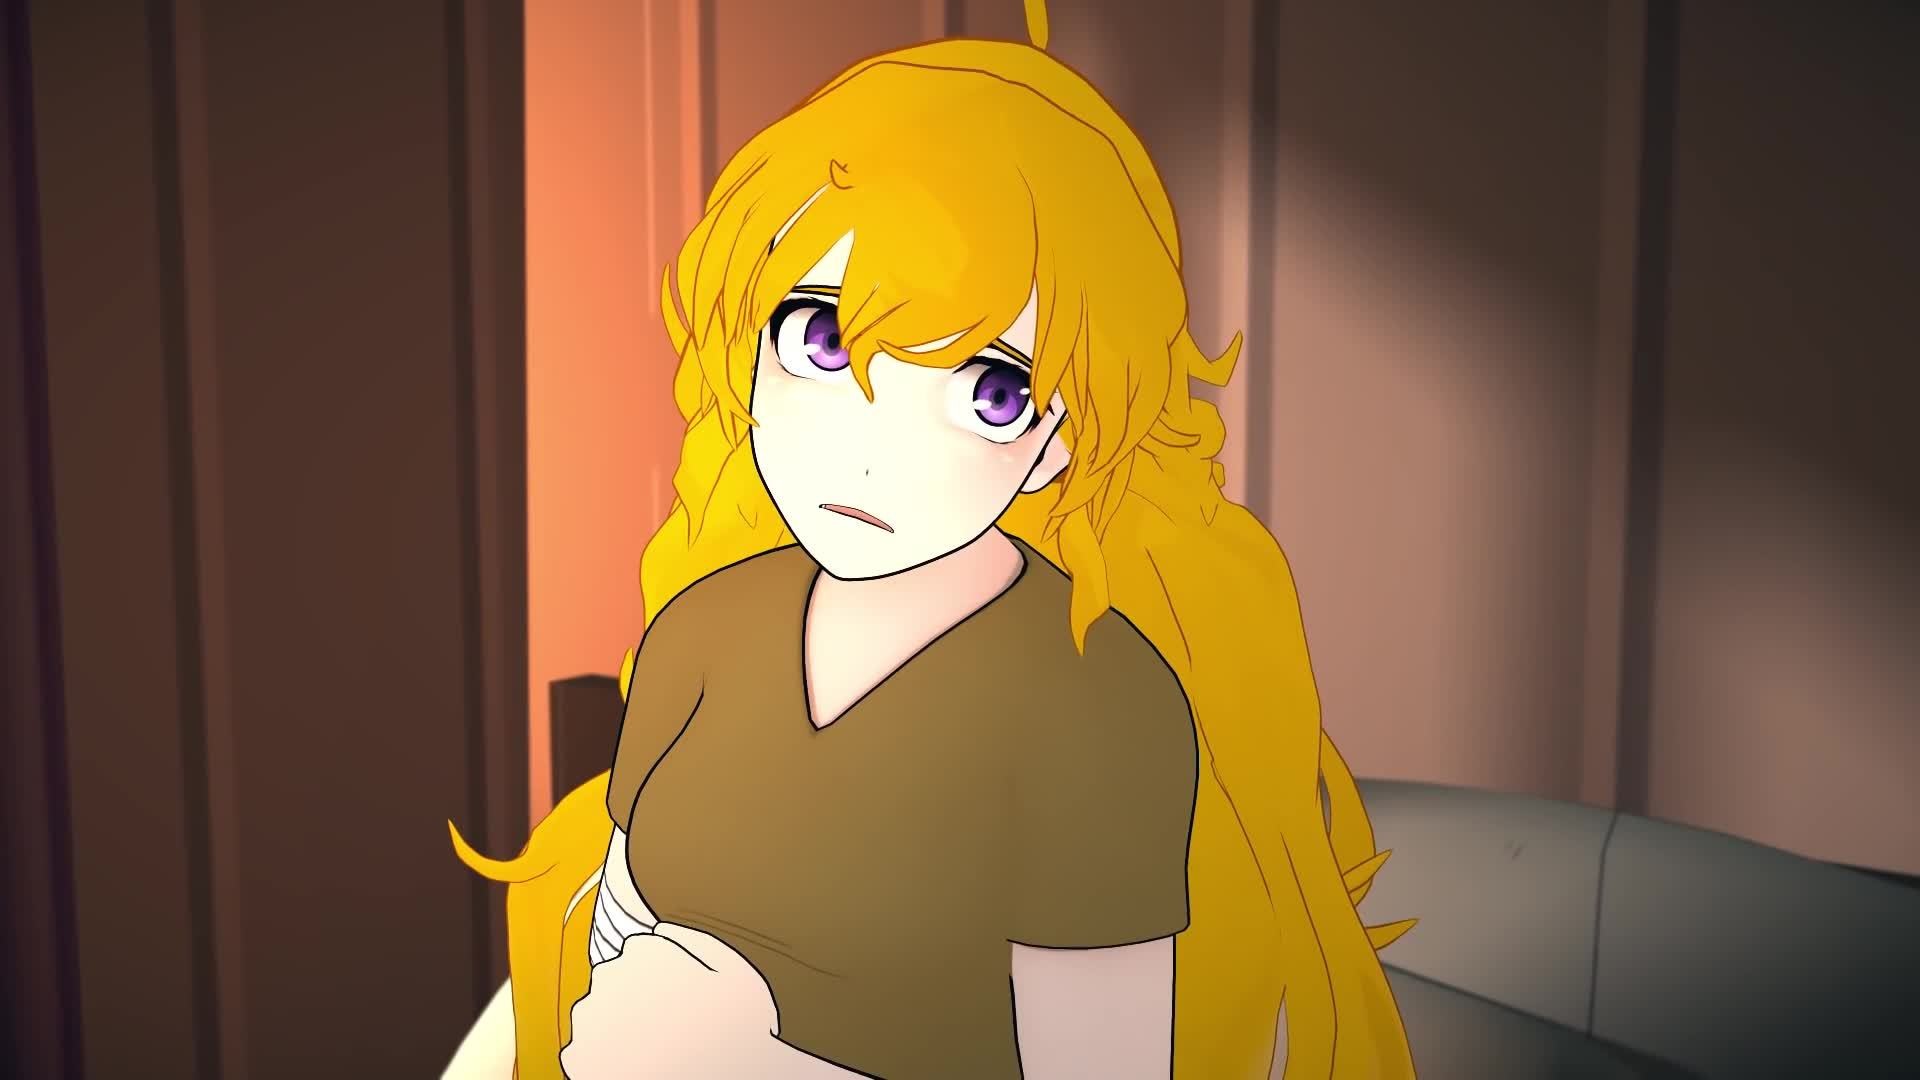 1920x1080 ... Yang Xiao Long Wallpapers and Backgrounds ...